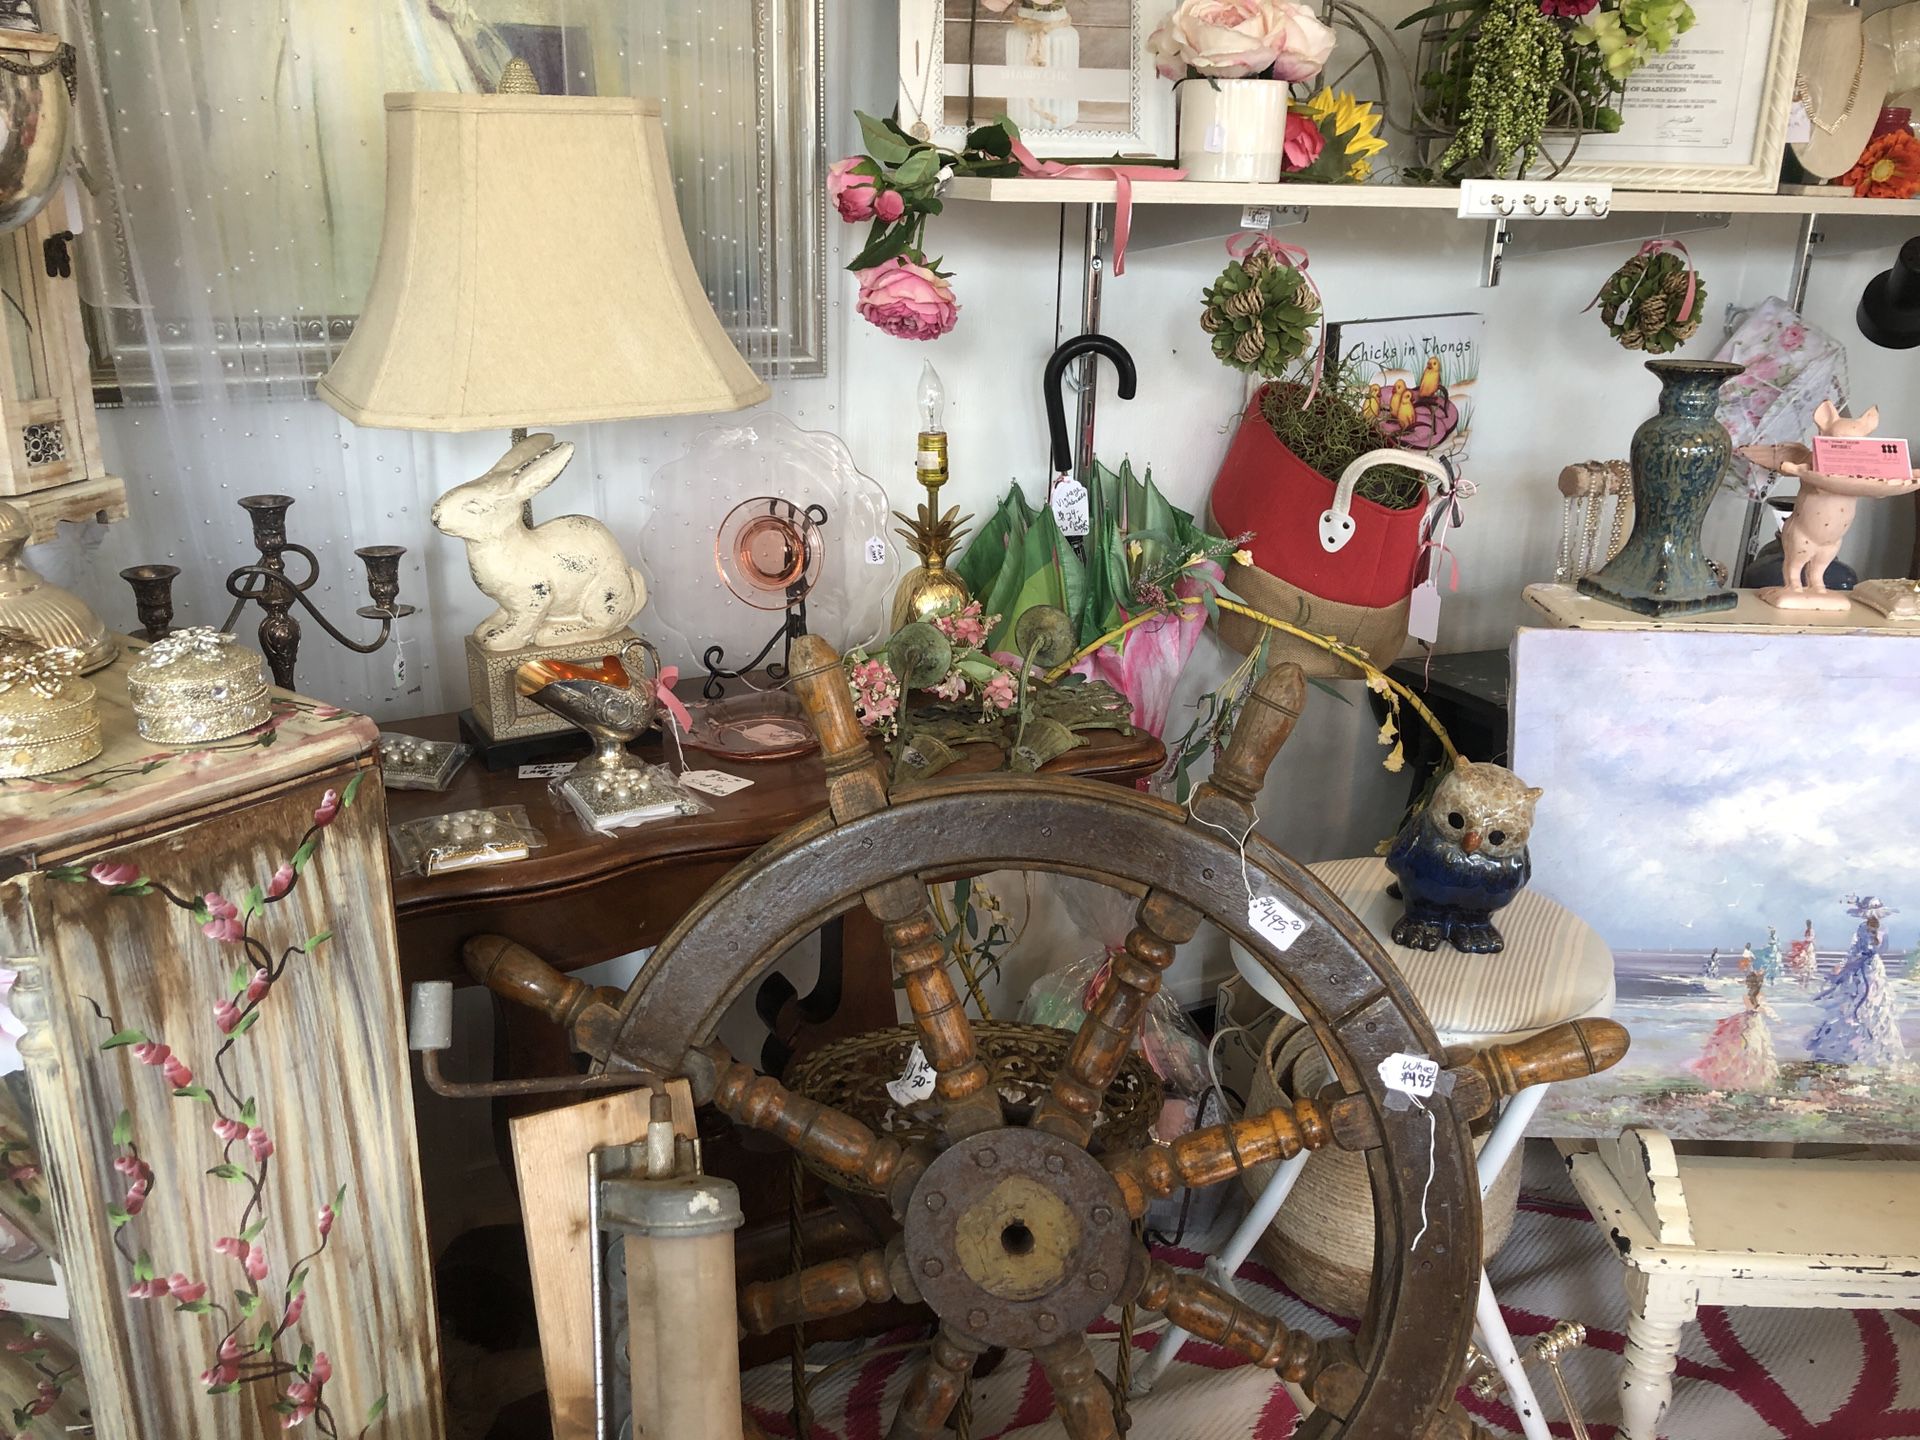 Diff unique antique shoppe all reasonable offers accepted. $1Wheel 495.00 ..always good deals and reasonable {contact info removed} Lori